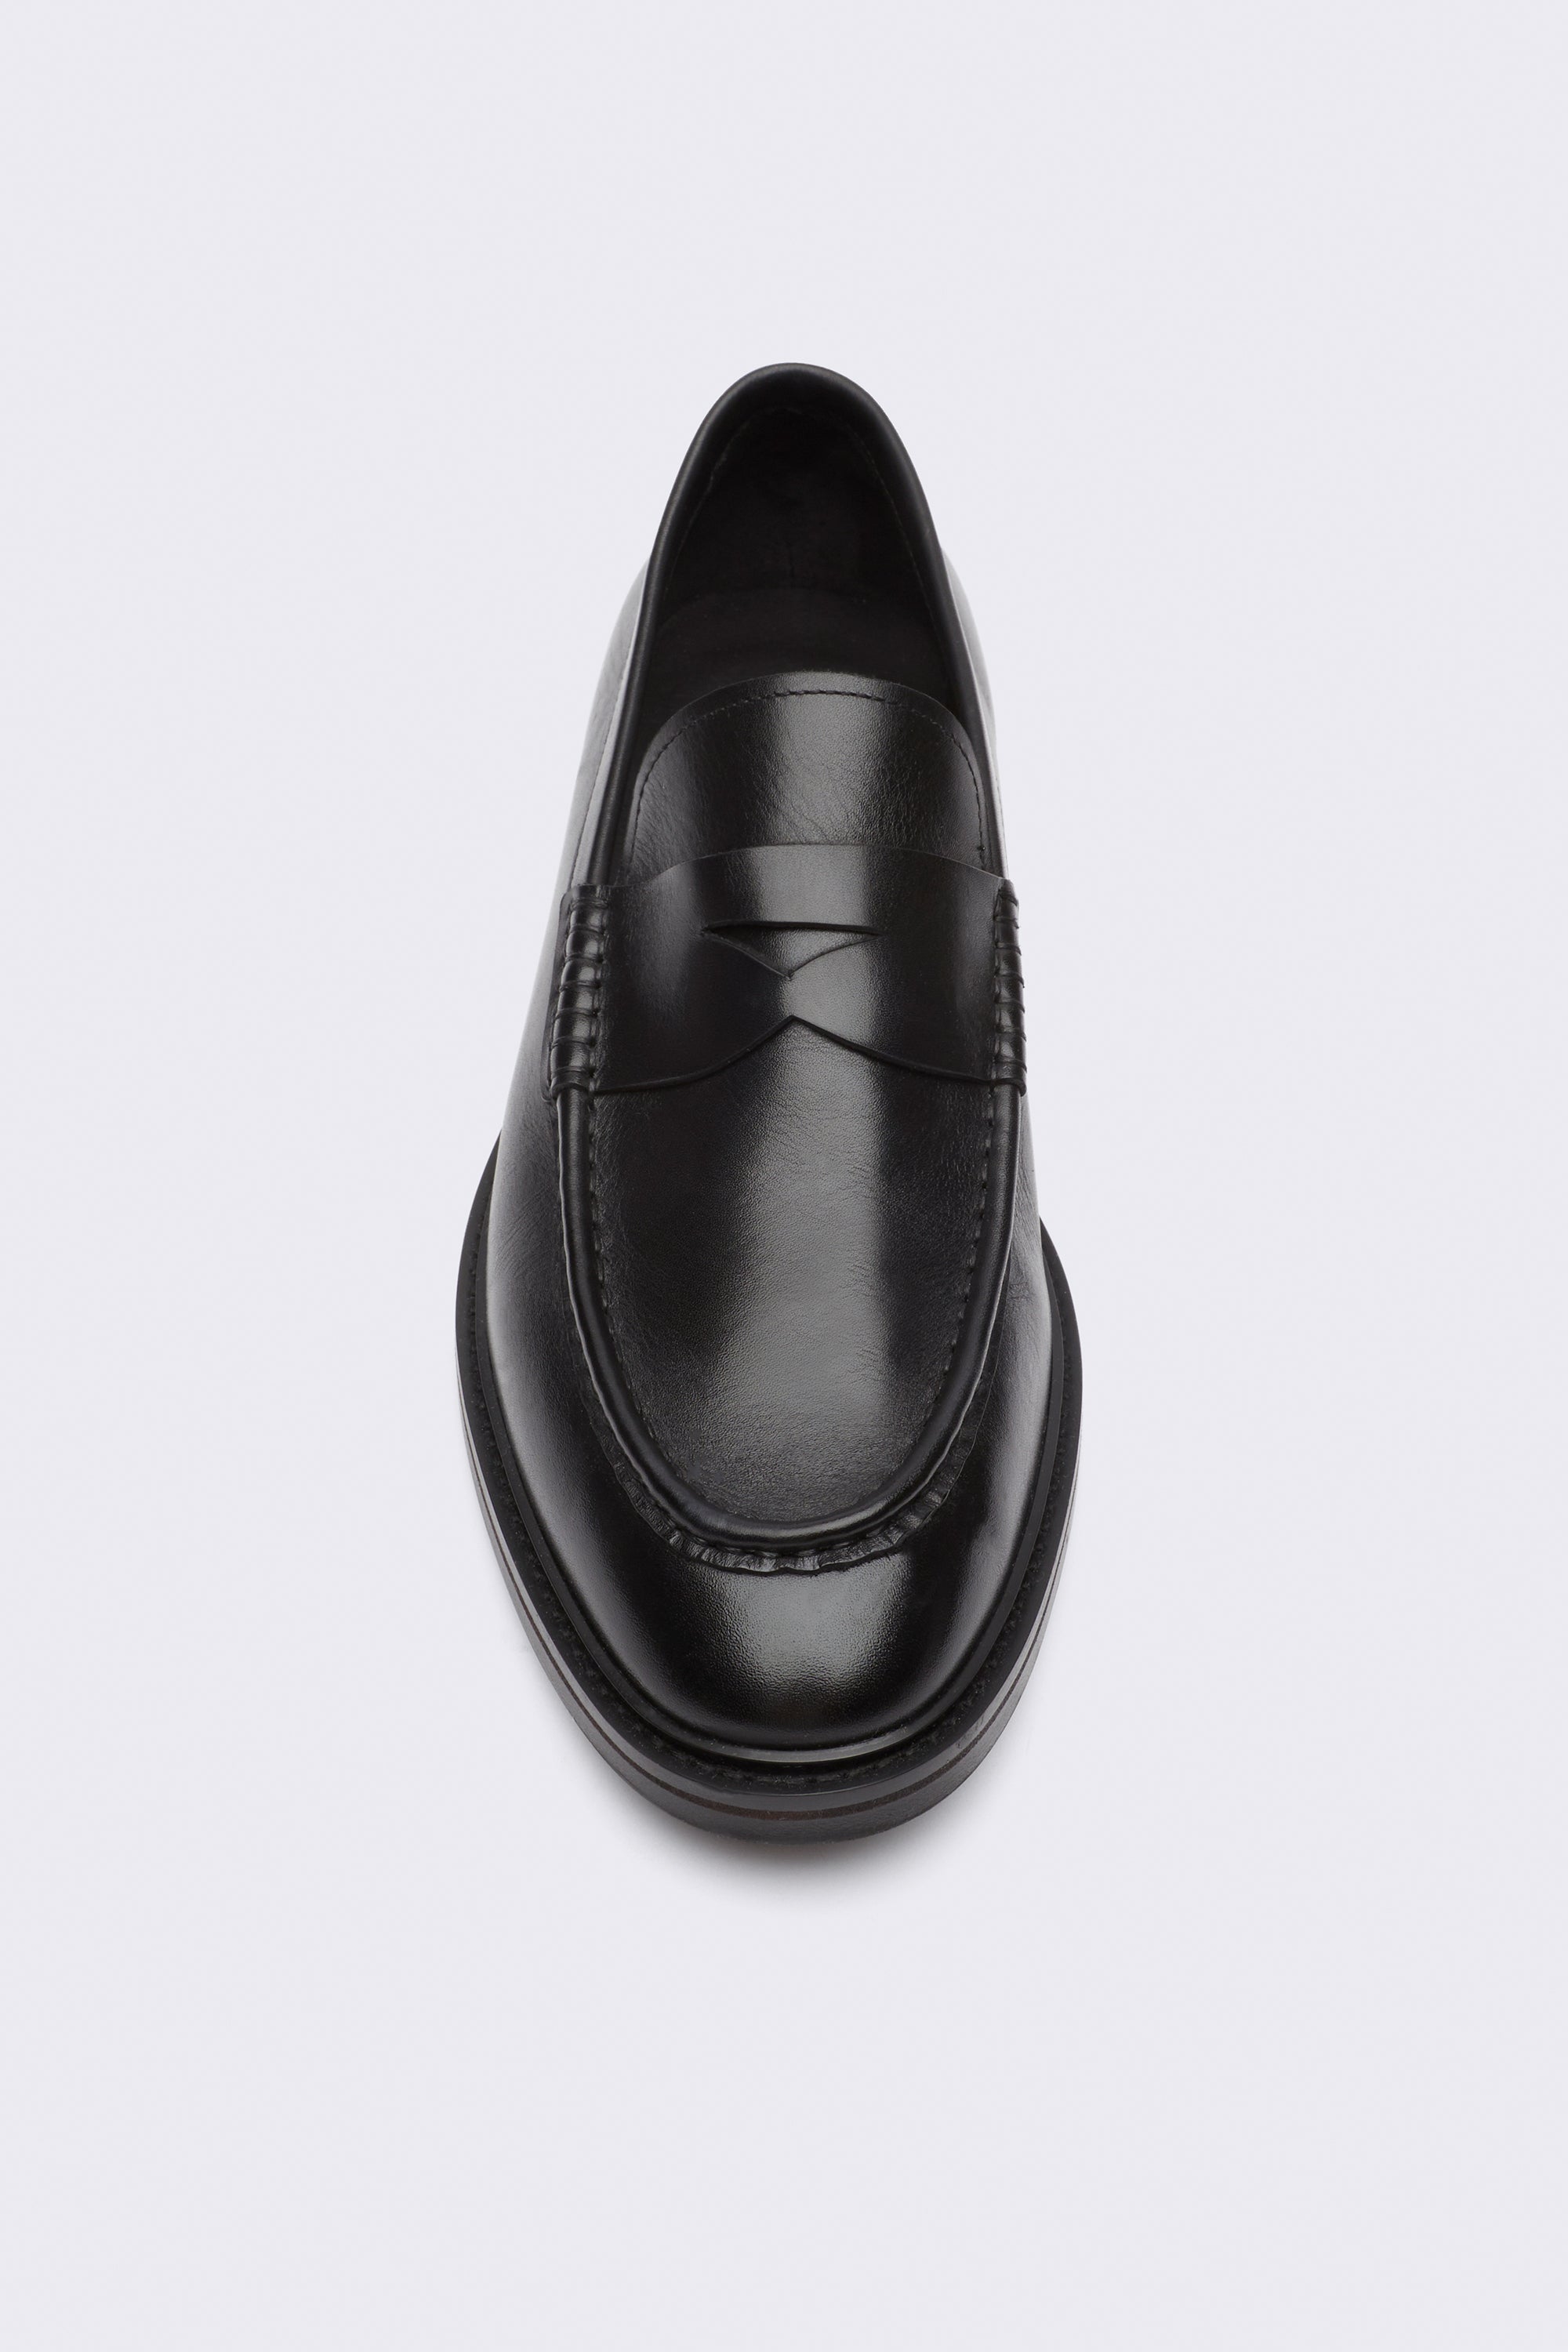 Boston Leather Loafer